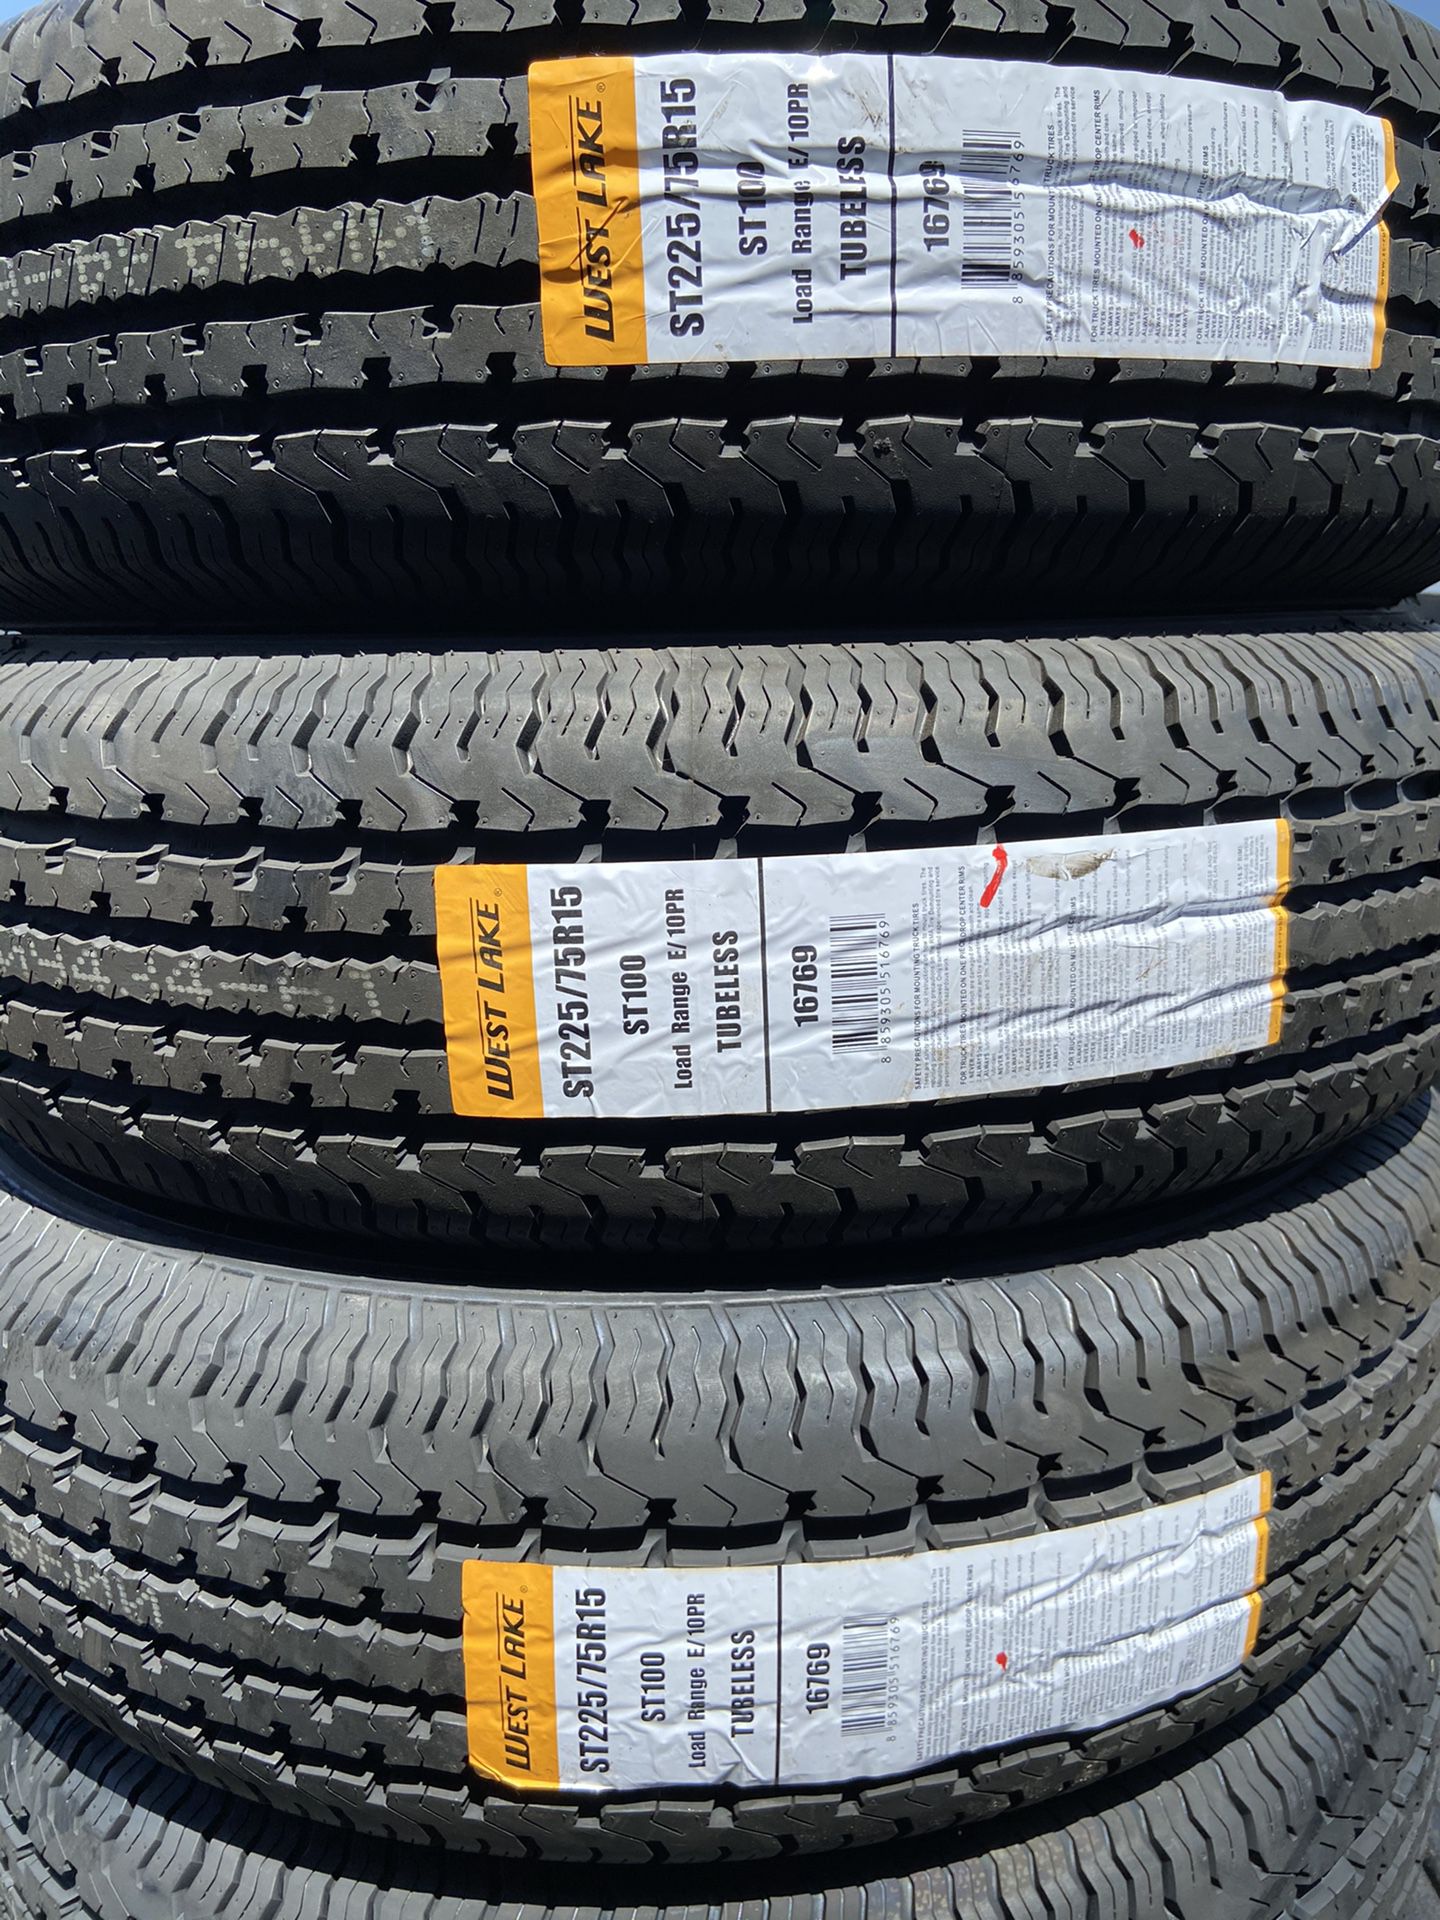 WEST LAKE Trailer tires ST225/75R15 $66 each new 8 ply trailer tires 225/75/15 8ply 225/75R/15 8ply special trailer tire